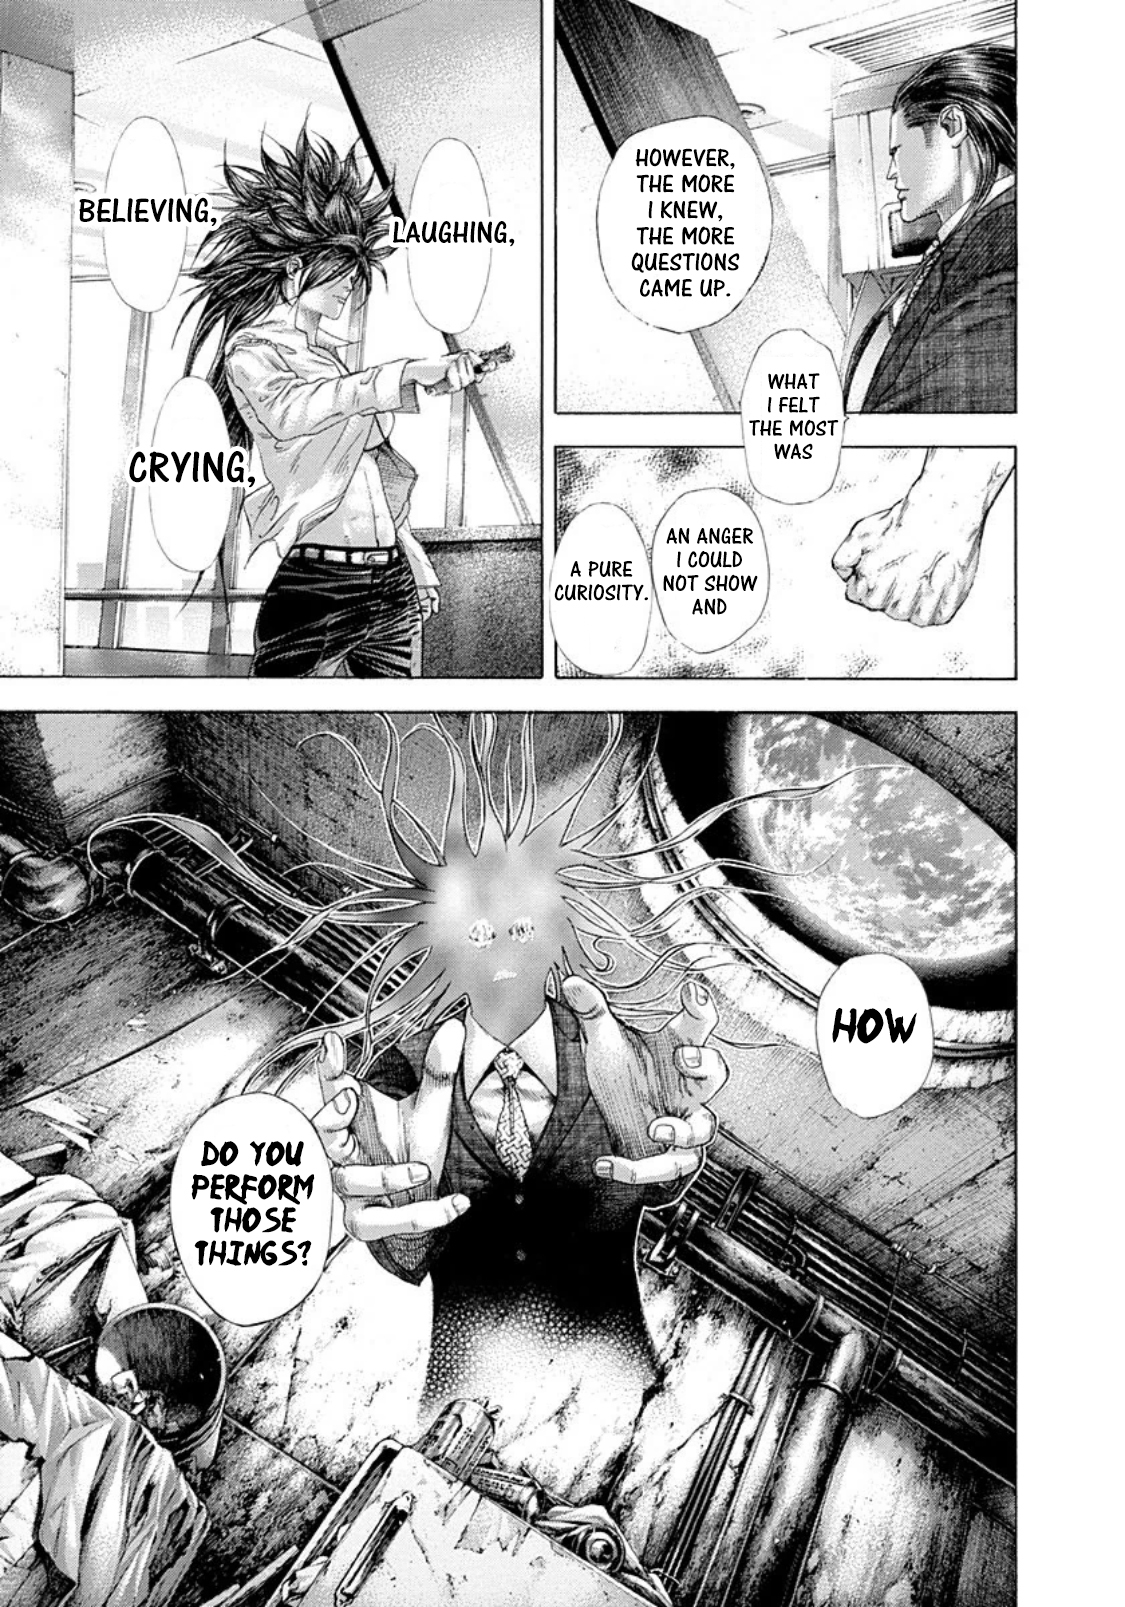 Usogui Vol. 24 Ch. 262 The Weird Feeling In Violence, Bullets And Deceit